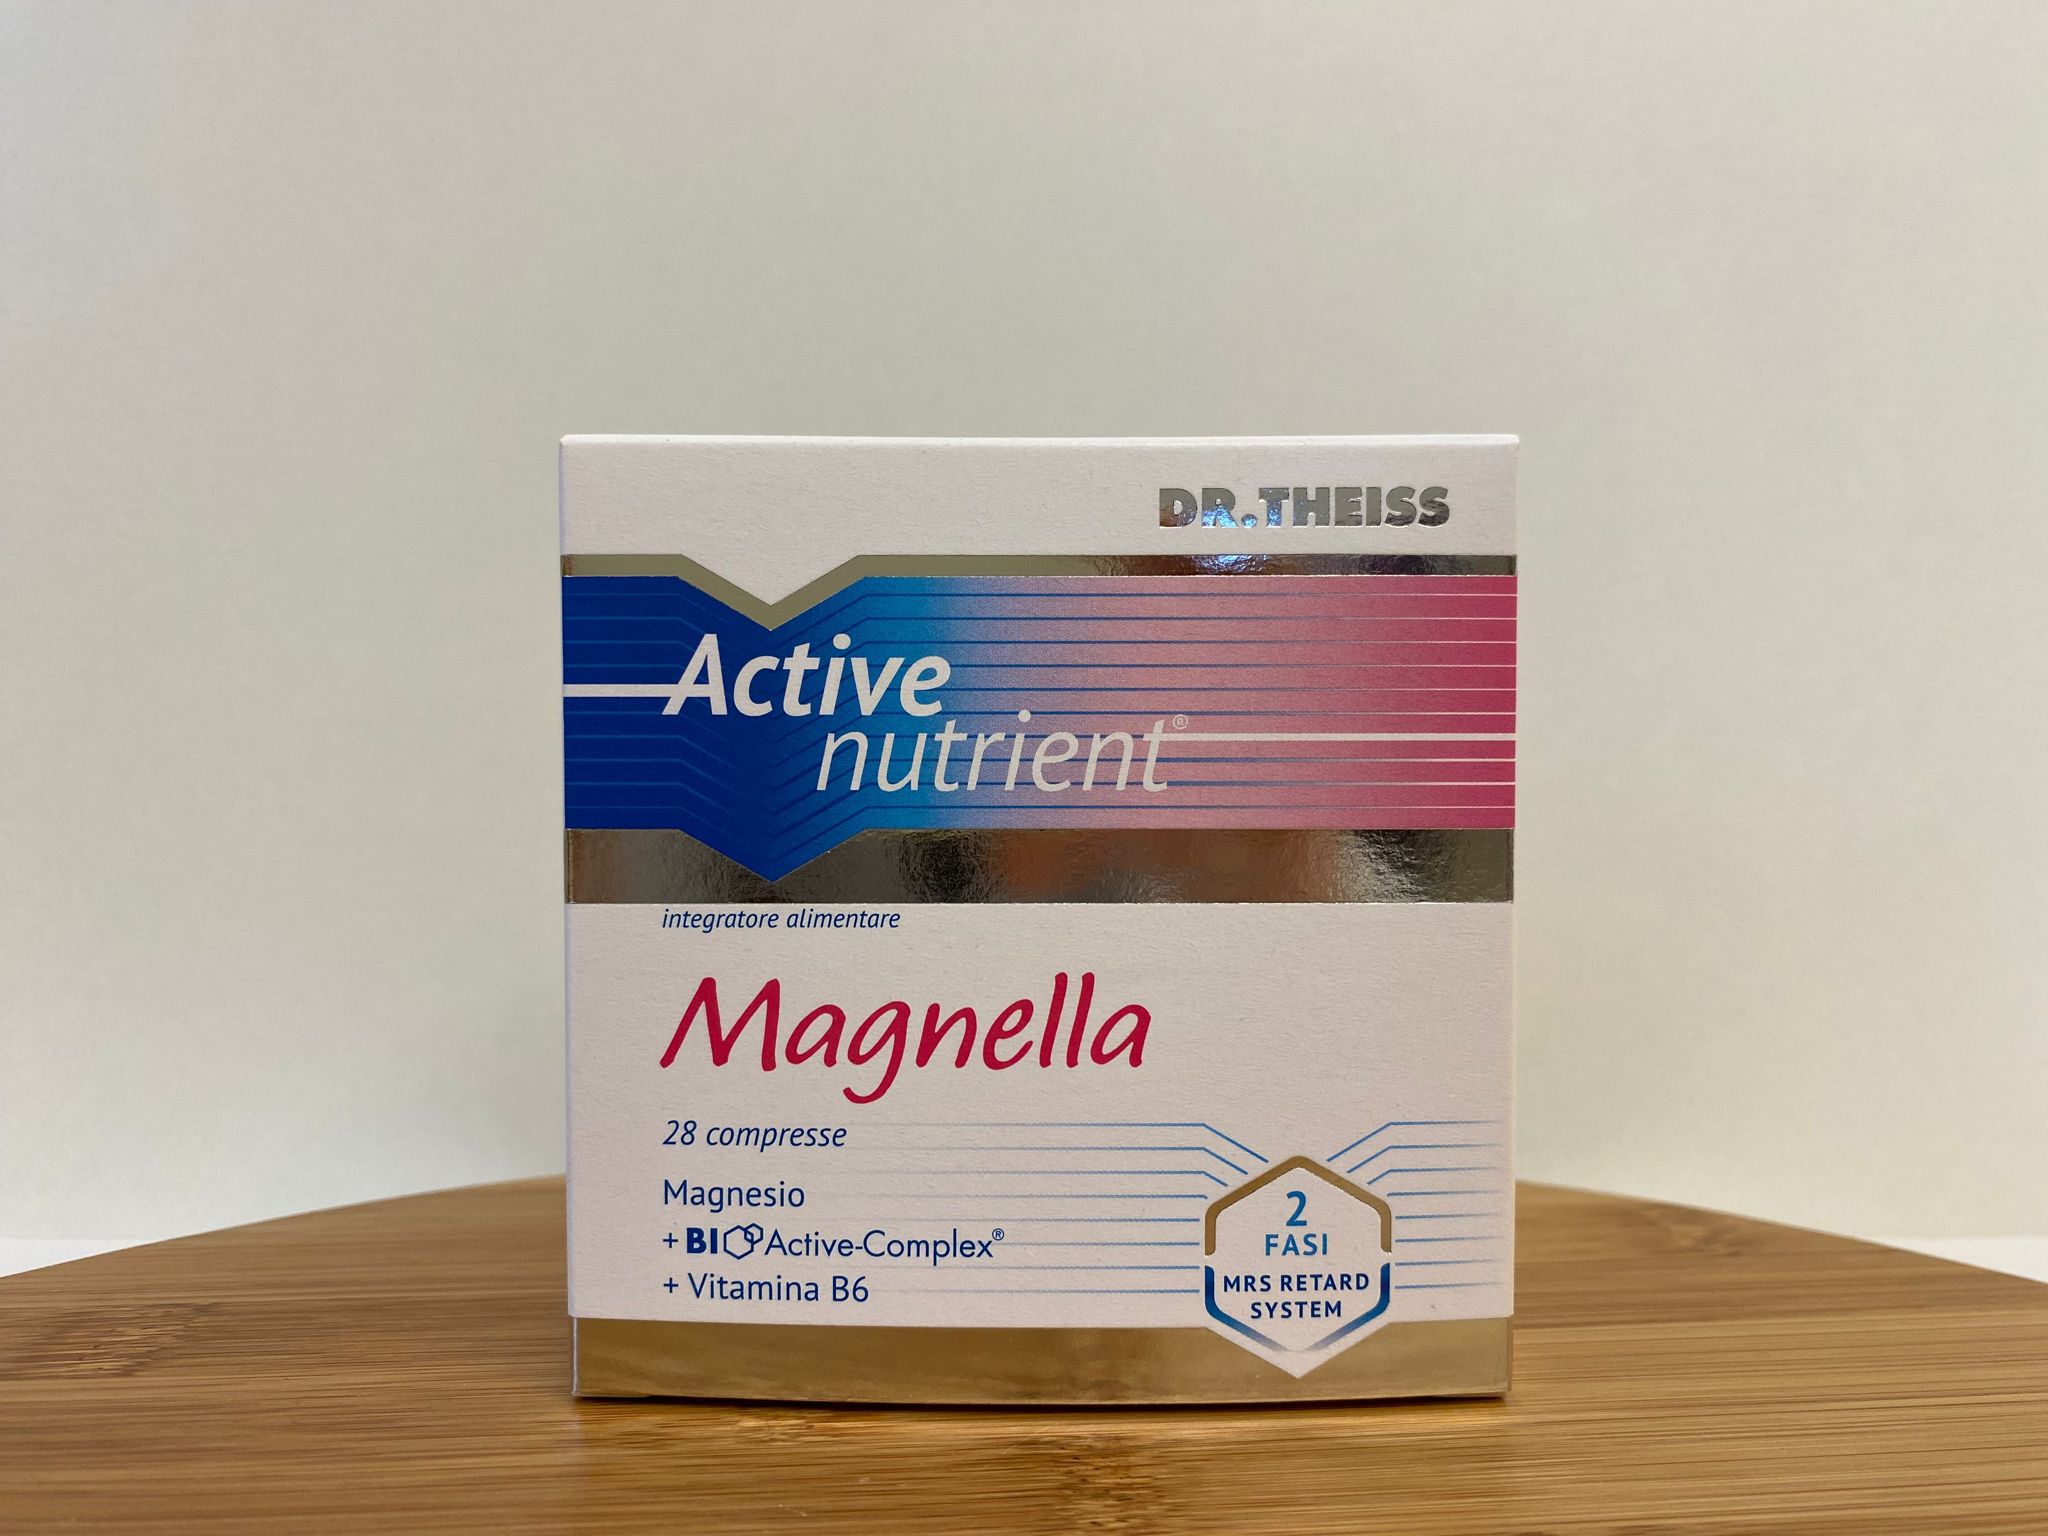 Dr. Theiss: Active Nutrient Magnella